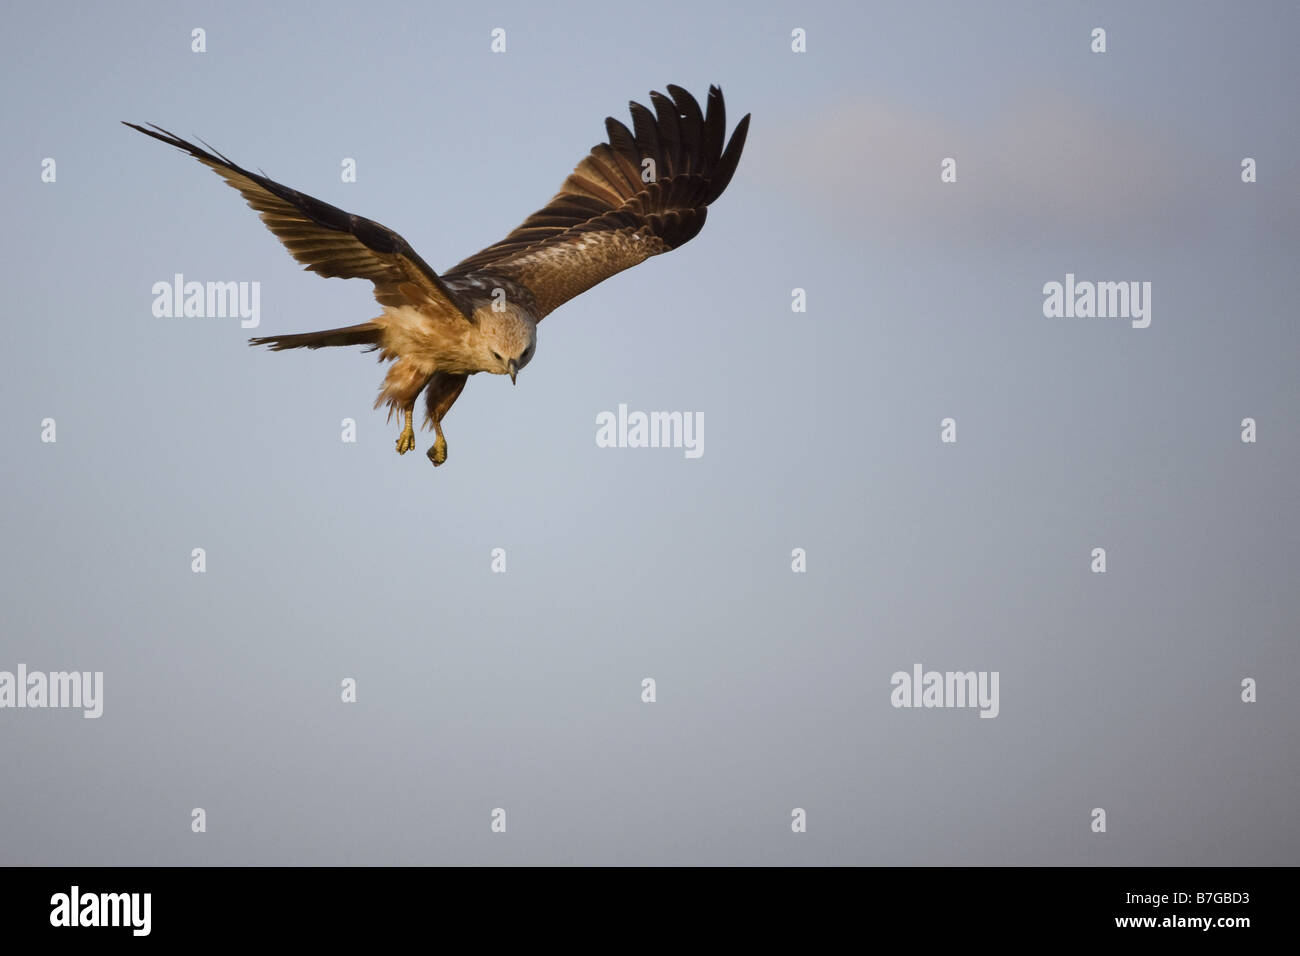 Juvenile Brahminy kite, also known as a Red-backed Sea-eagle in flight. Stock Photo